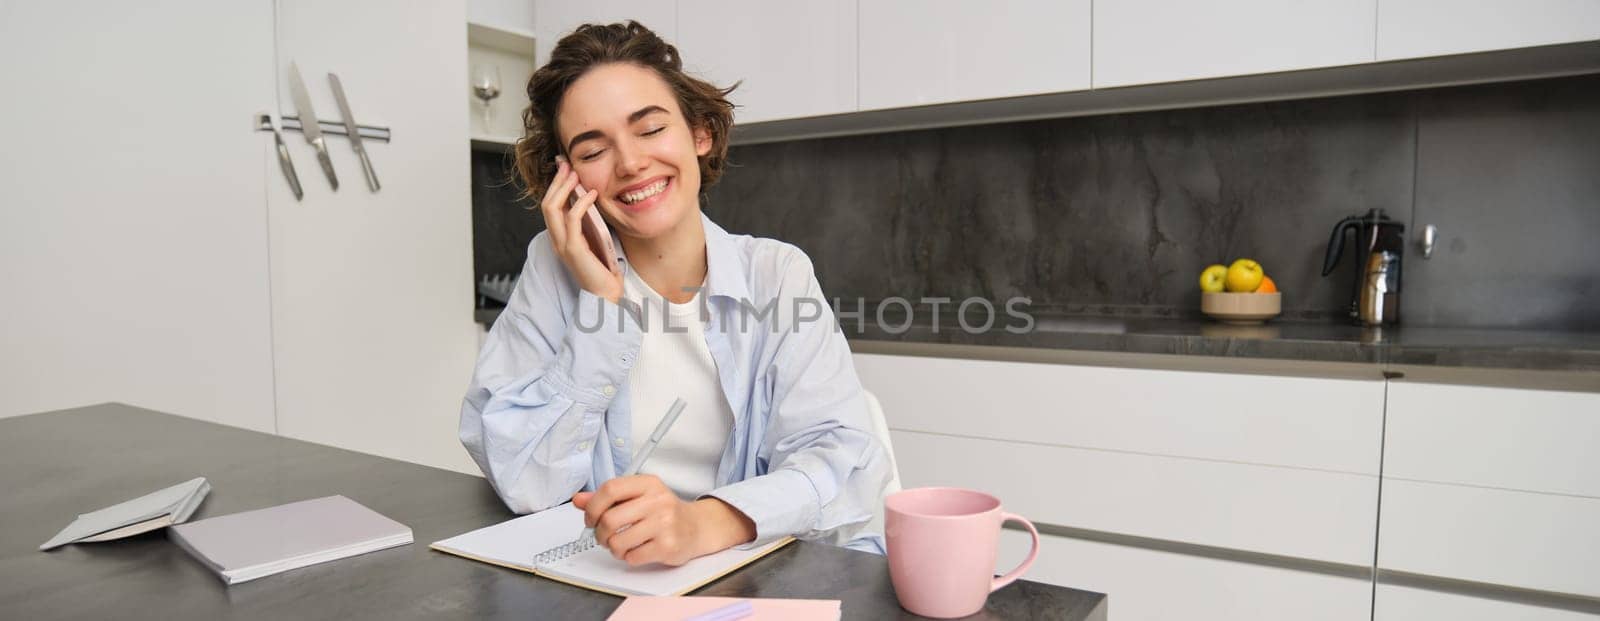 Portrait of candid, smiling young woman, talking on mobile phone, laughing during conversation on smartphone, writing down, making notes in notebook, sitting in kitchen at home.